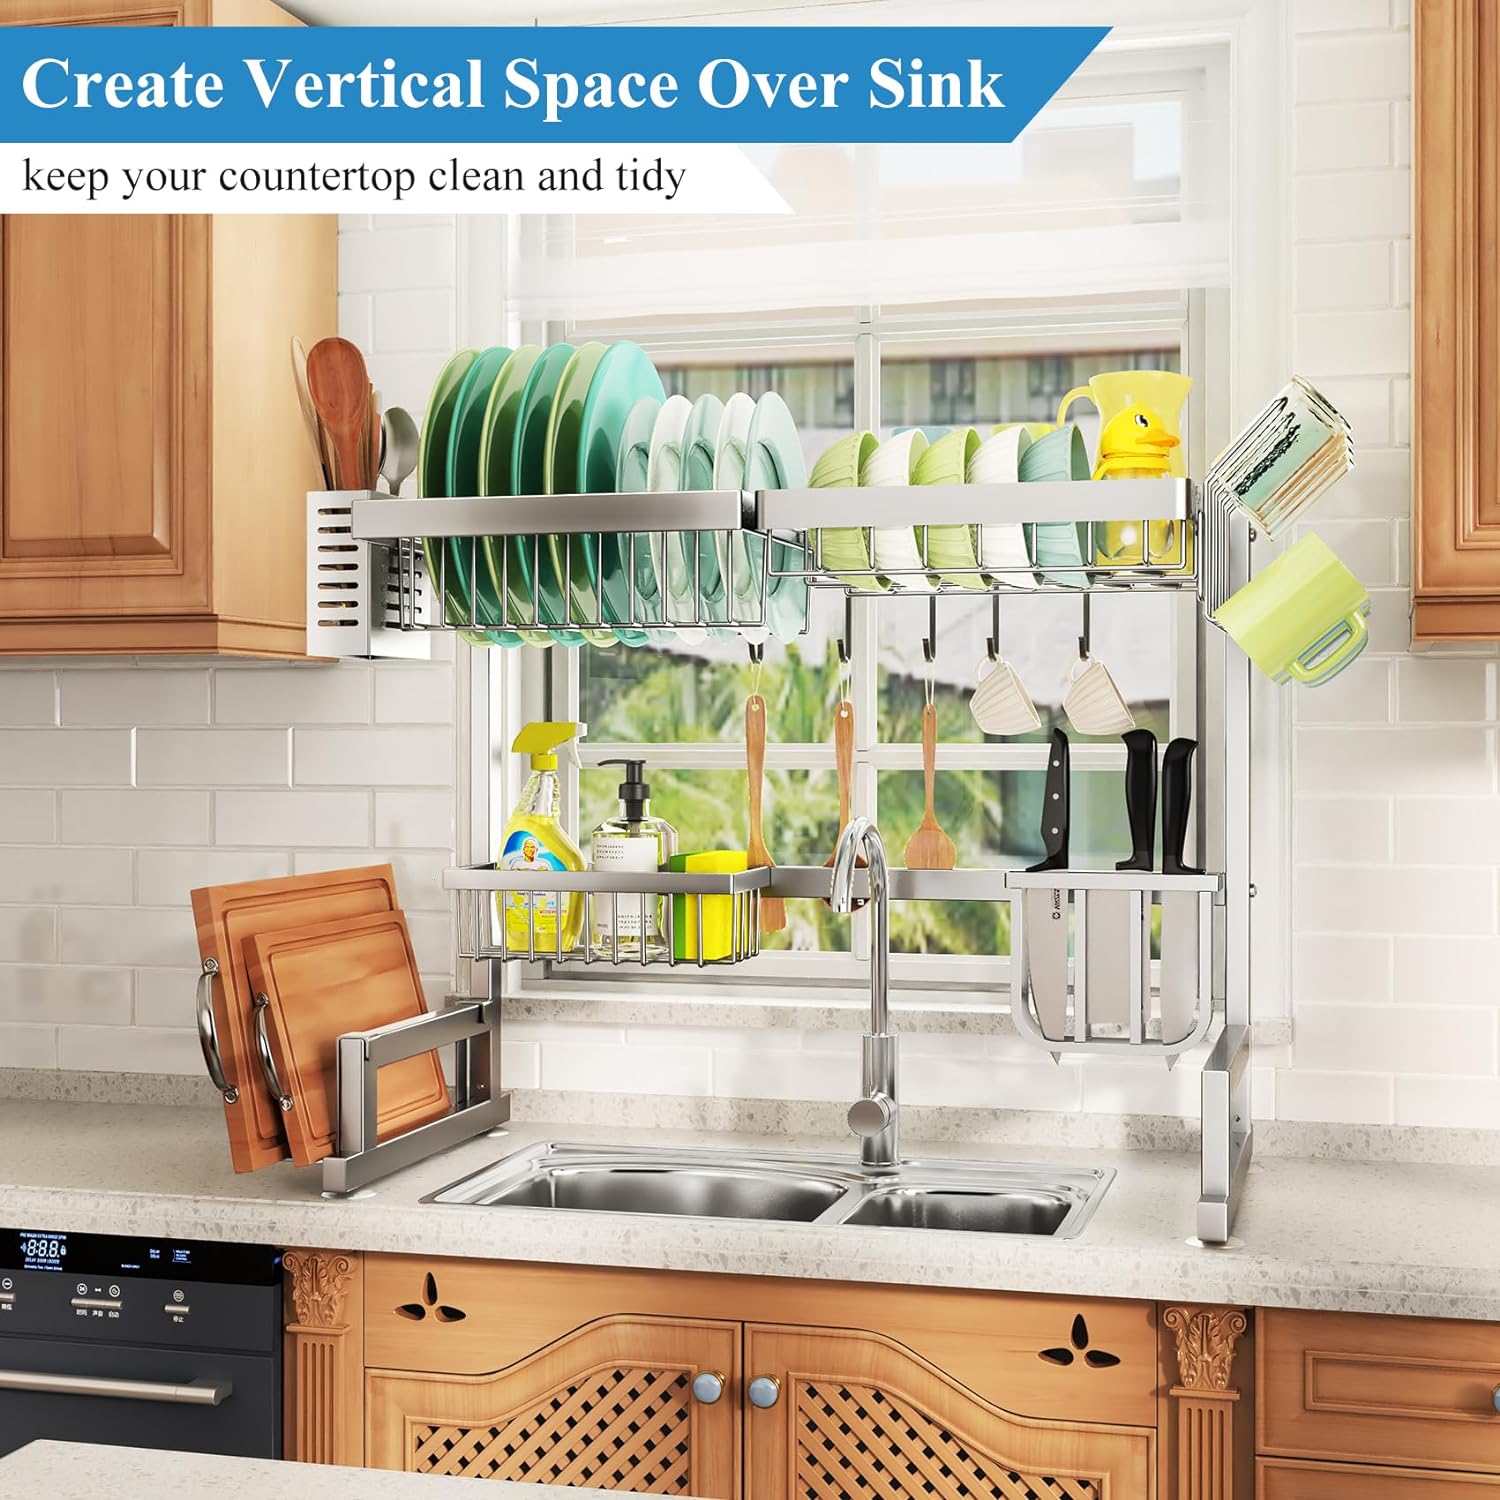 https://bigbigmart.com/wp-content/uploads/2023/10/Over-The-Sink-Dish-Drying-Rack-Full-Stainless-Steel-Adjustable-26.8-to-34.6-Large-Dish-Drying-Rack-for-Kitchen-Counter-with-Multiple-Baskets-Utensil-Sponge-Holder-Sink-Caddy-2-Tier-Silver1.jpg